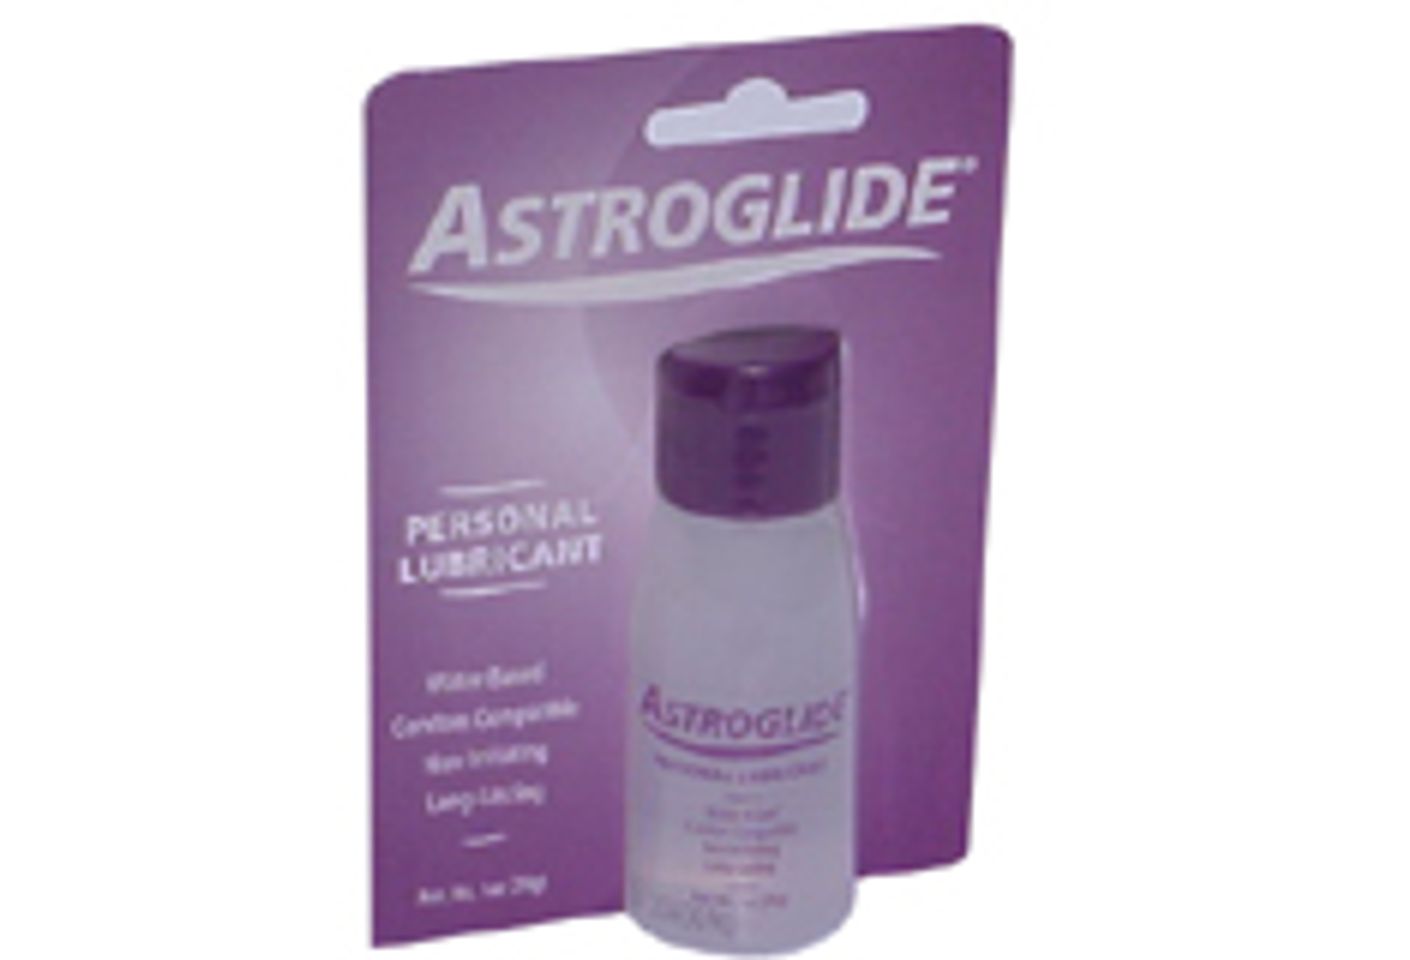 Astroglide Now Available in One Ounce Bottles From Paradise Marketing